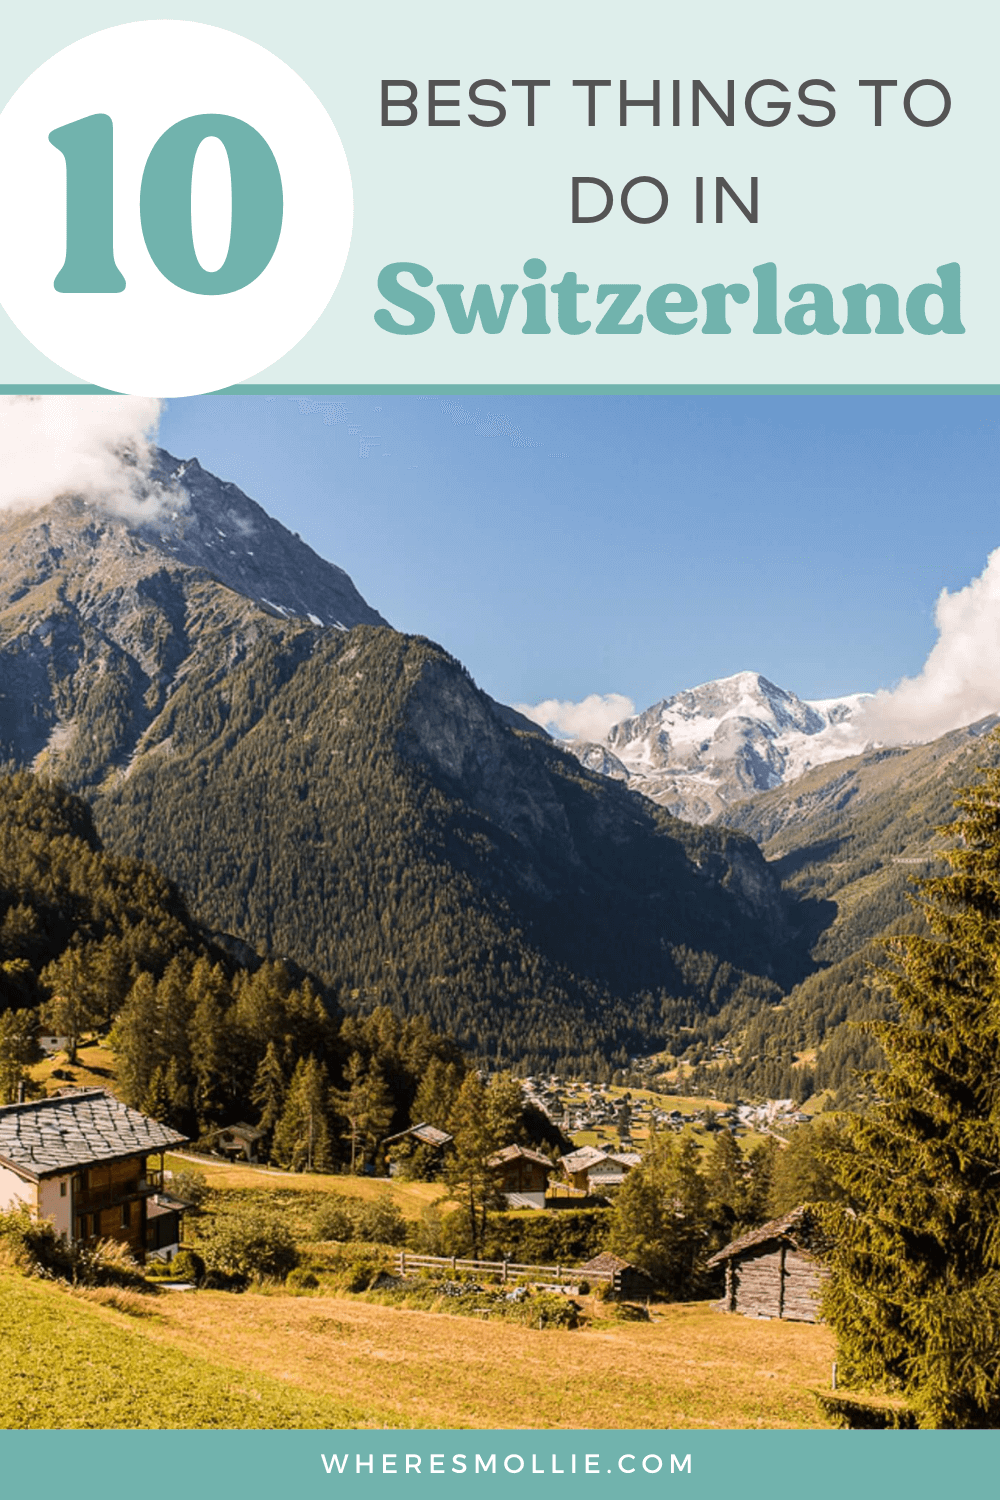 The best things to do in Switzerland